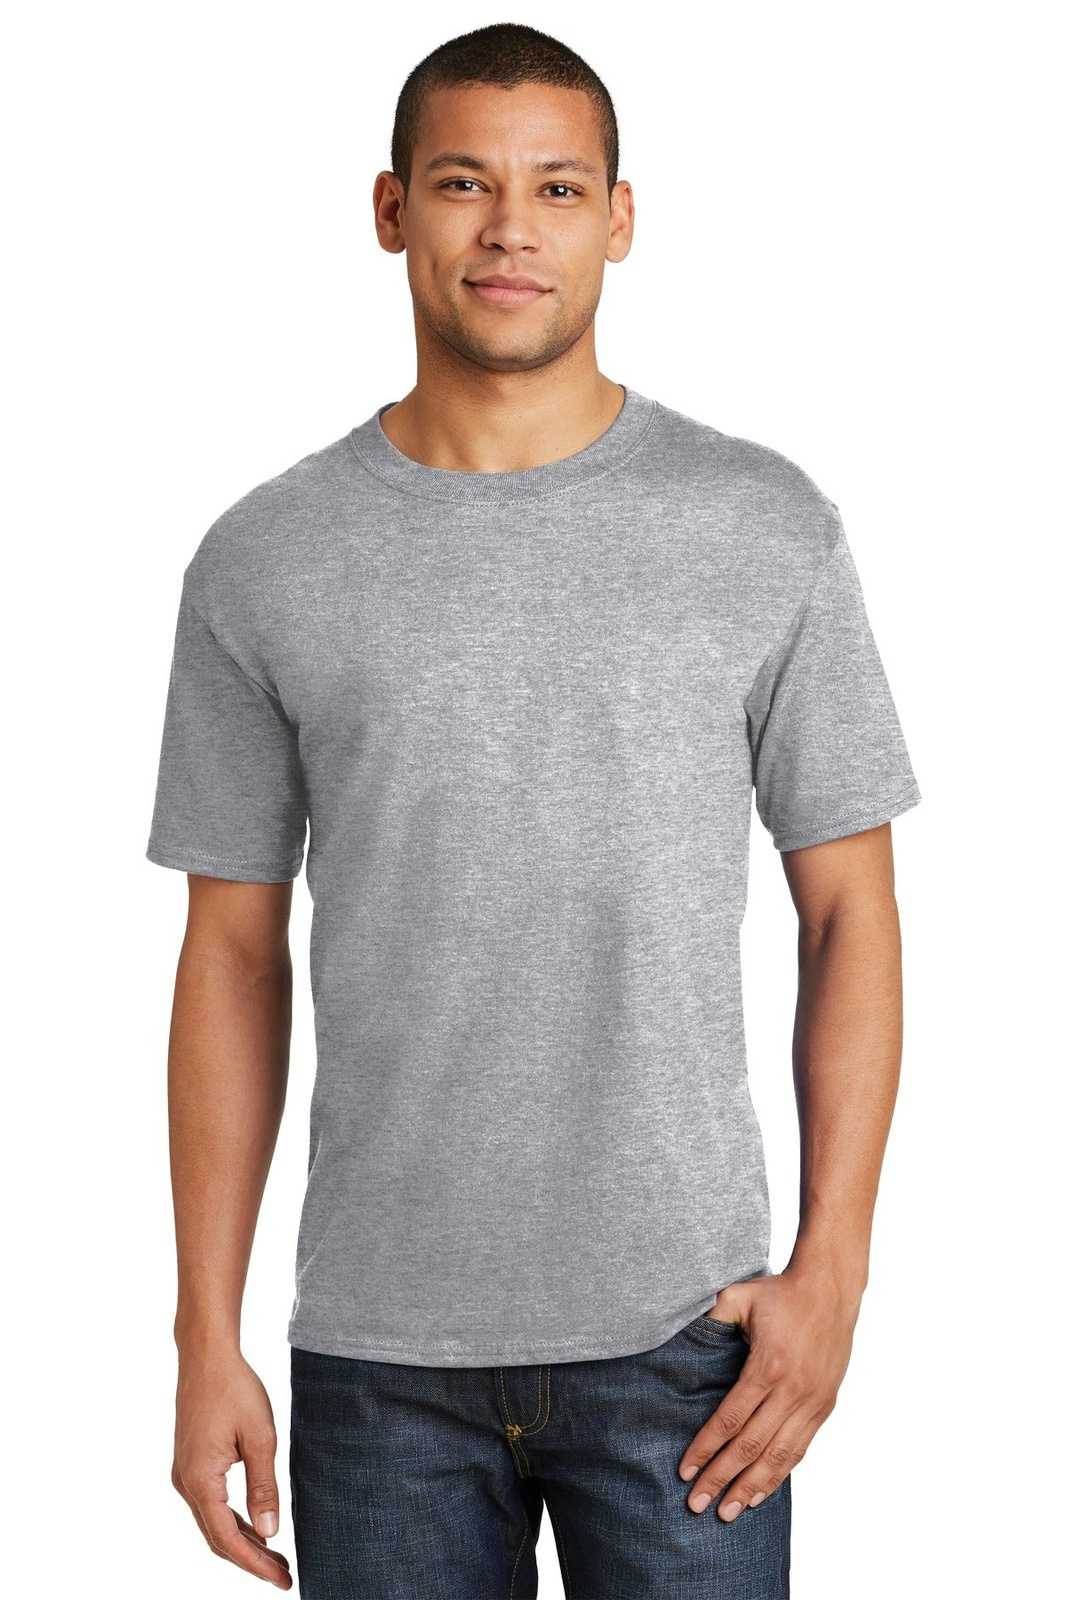 Hanes 5180 Beefy-T 100% Cotton T-Shirt - Light Steel - HIT a Double